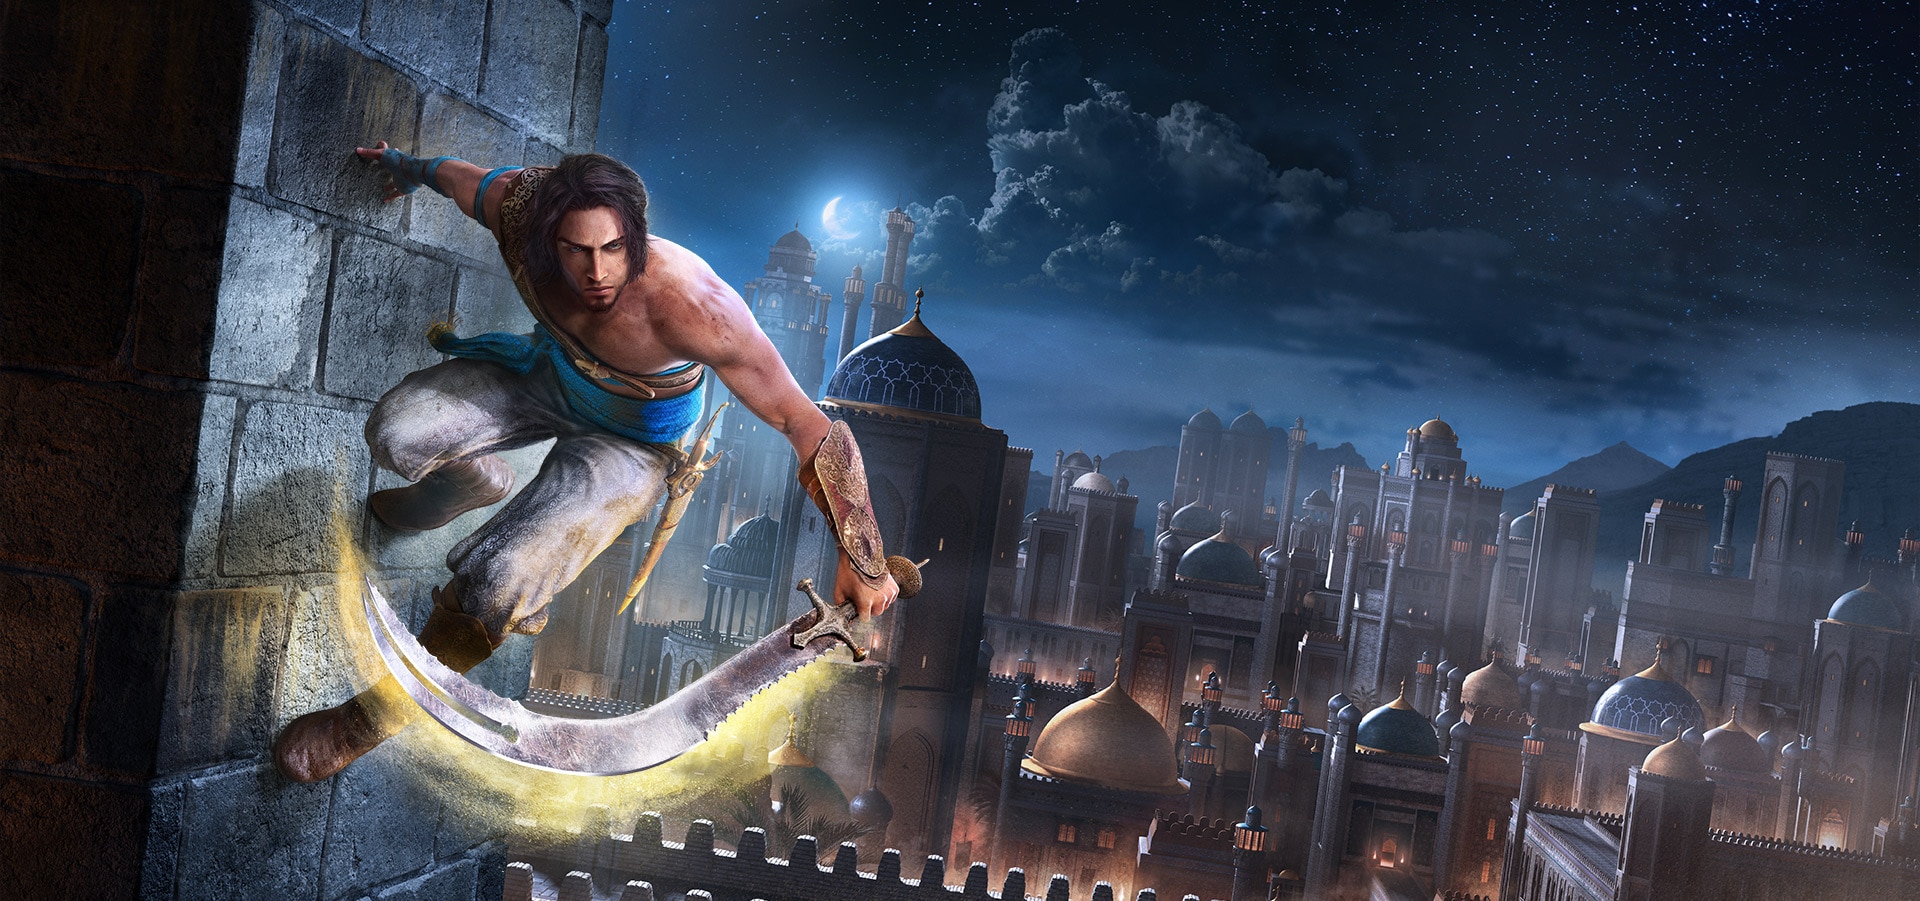 Prince of Persia The Sands of Time Remake (PS4) cheap - Price of $23.22